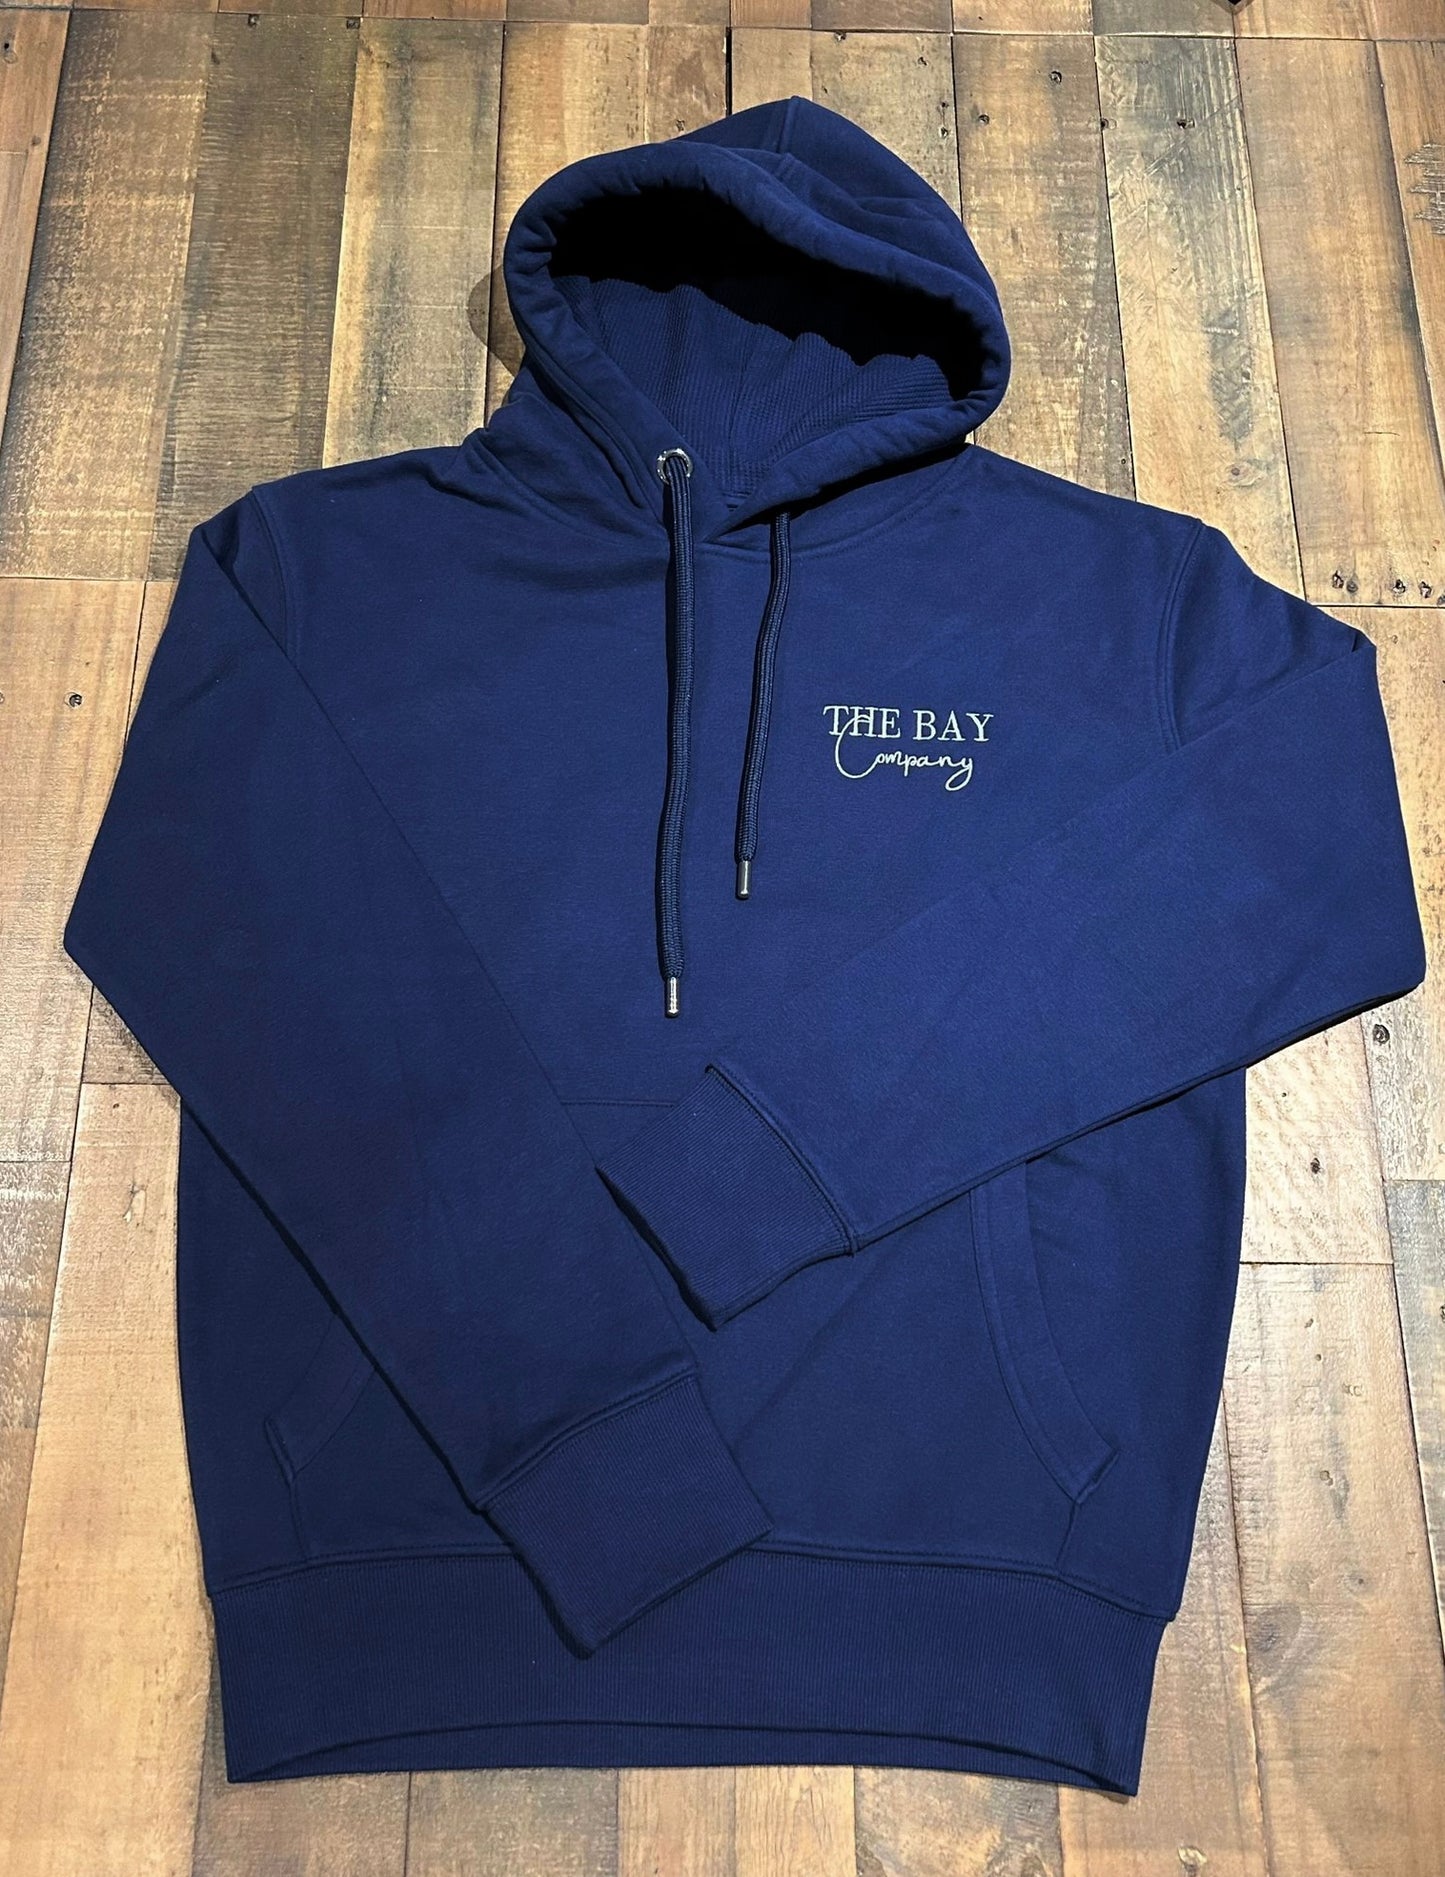 The women’s “Whitby” hoodie in navy blue from The Bay Company. 